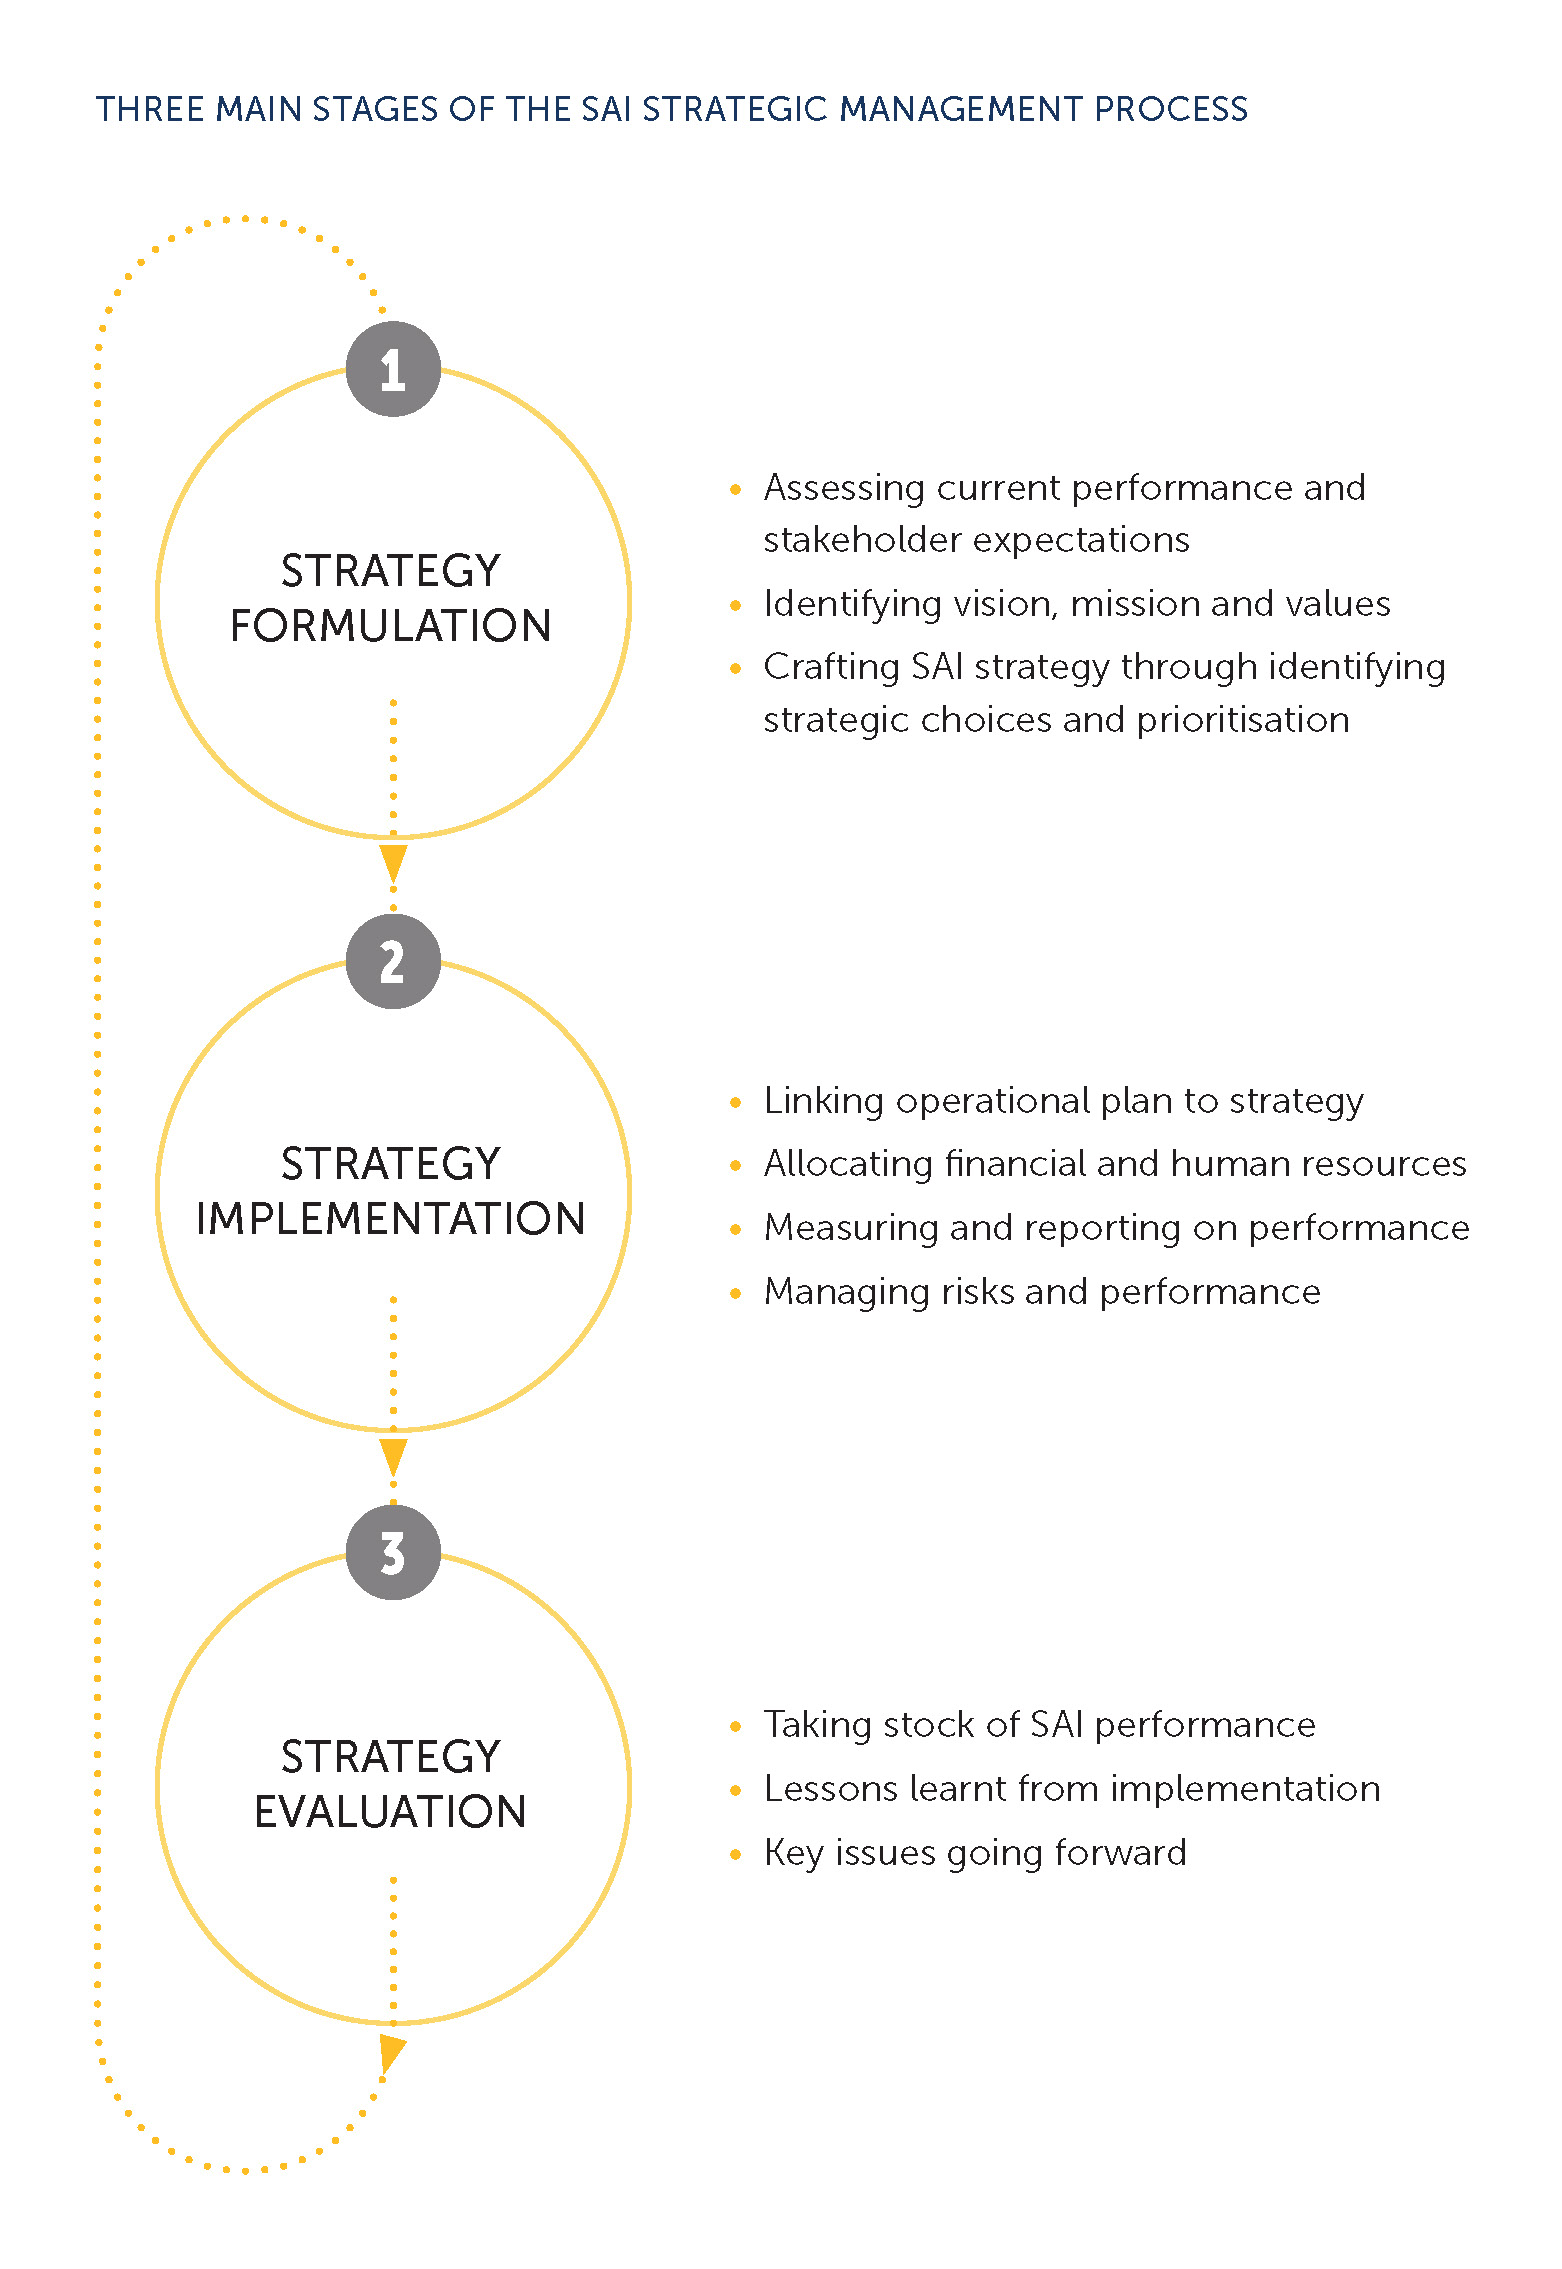 Figure: Three Main Stages of the SAI Strategic Management Process